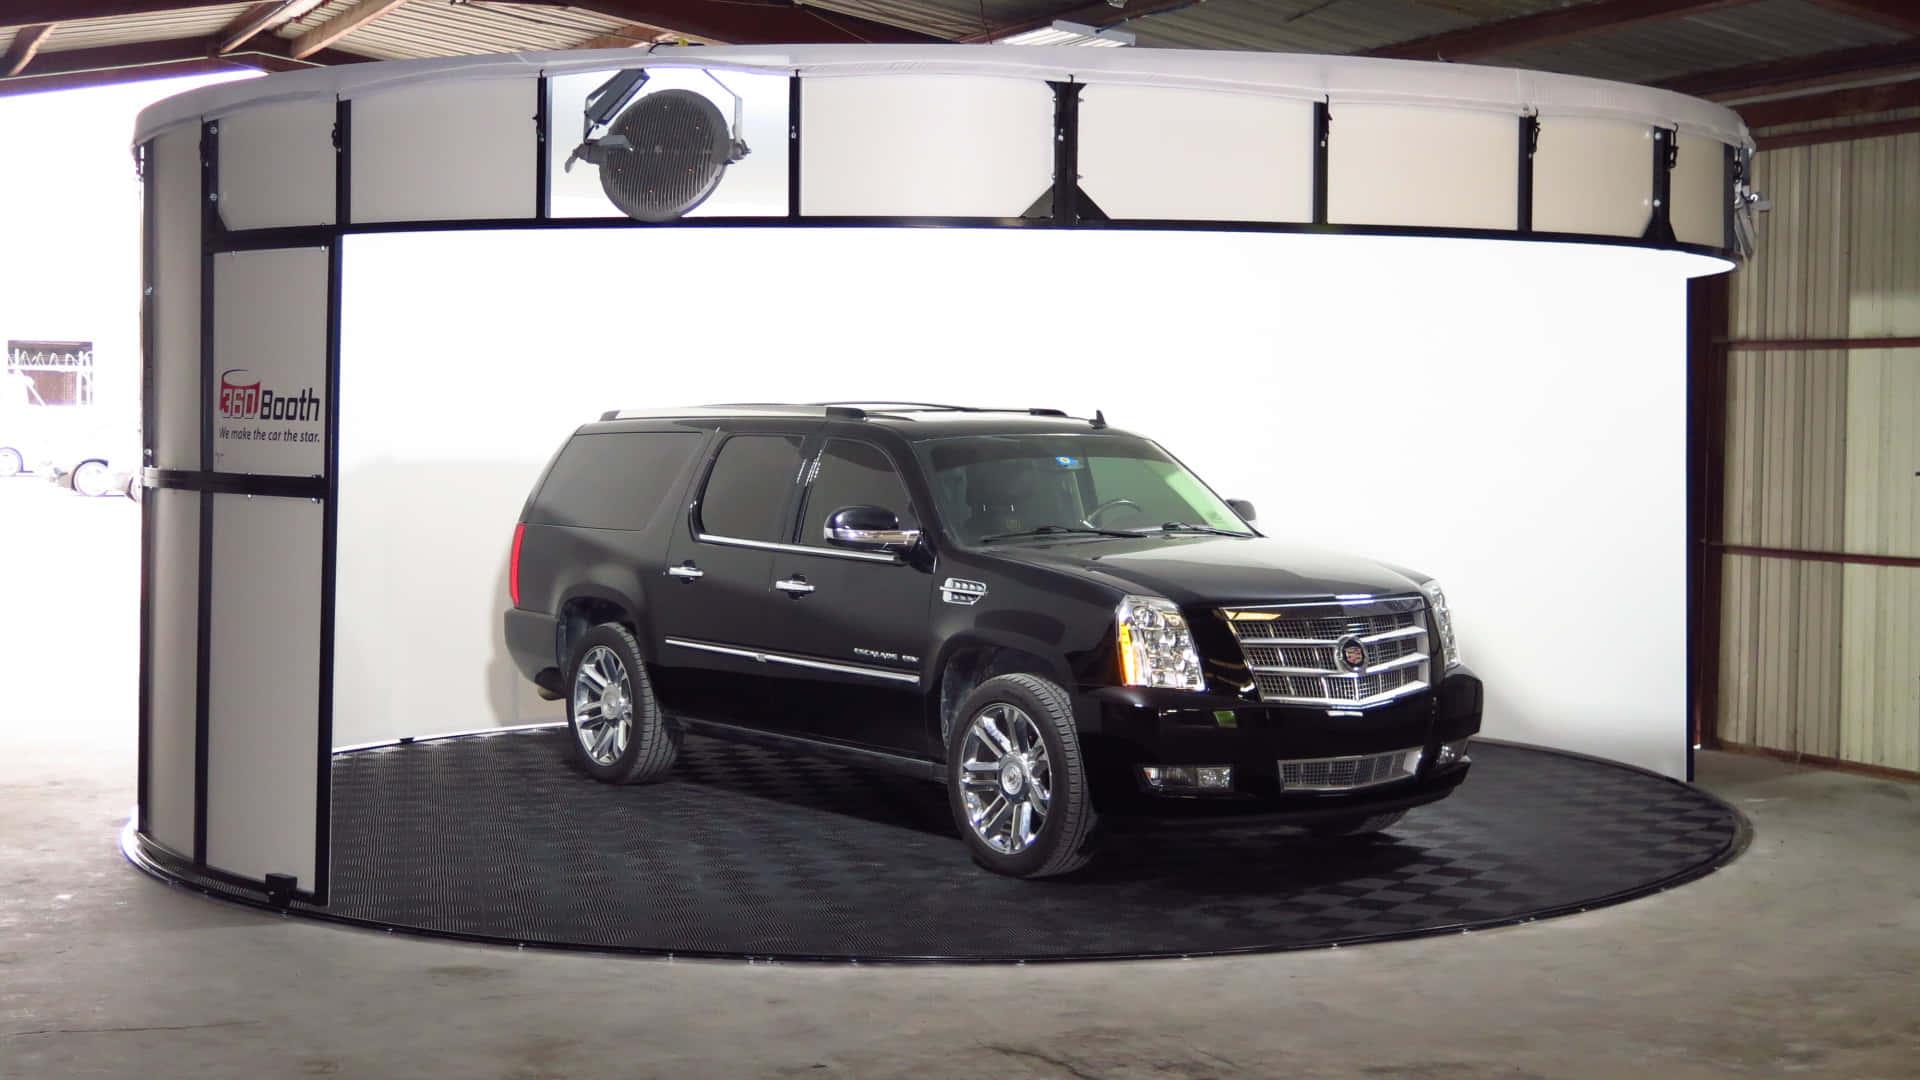 A Black Suv Is In A Circular Booth